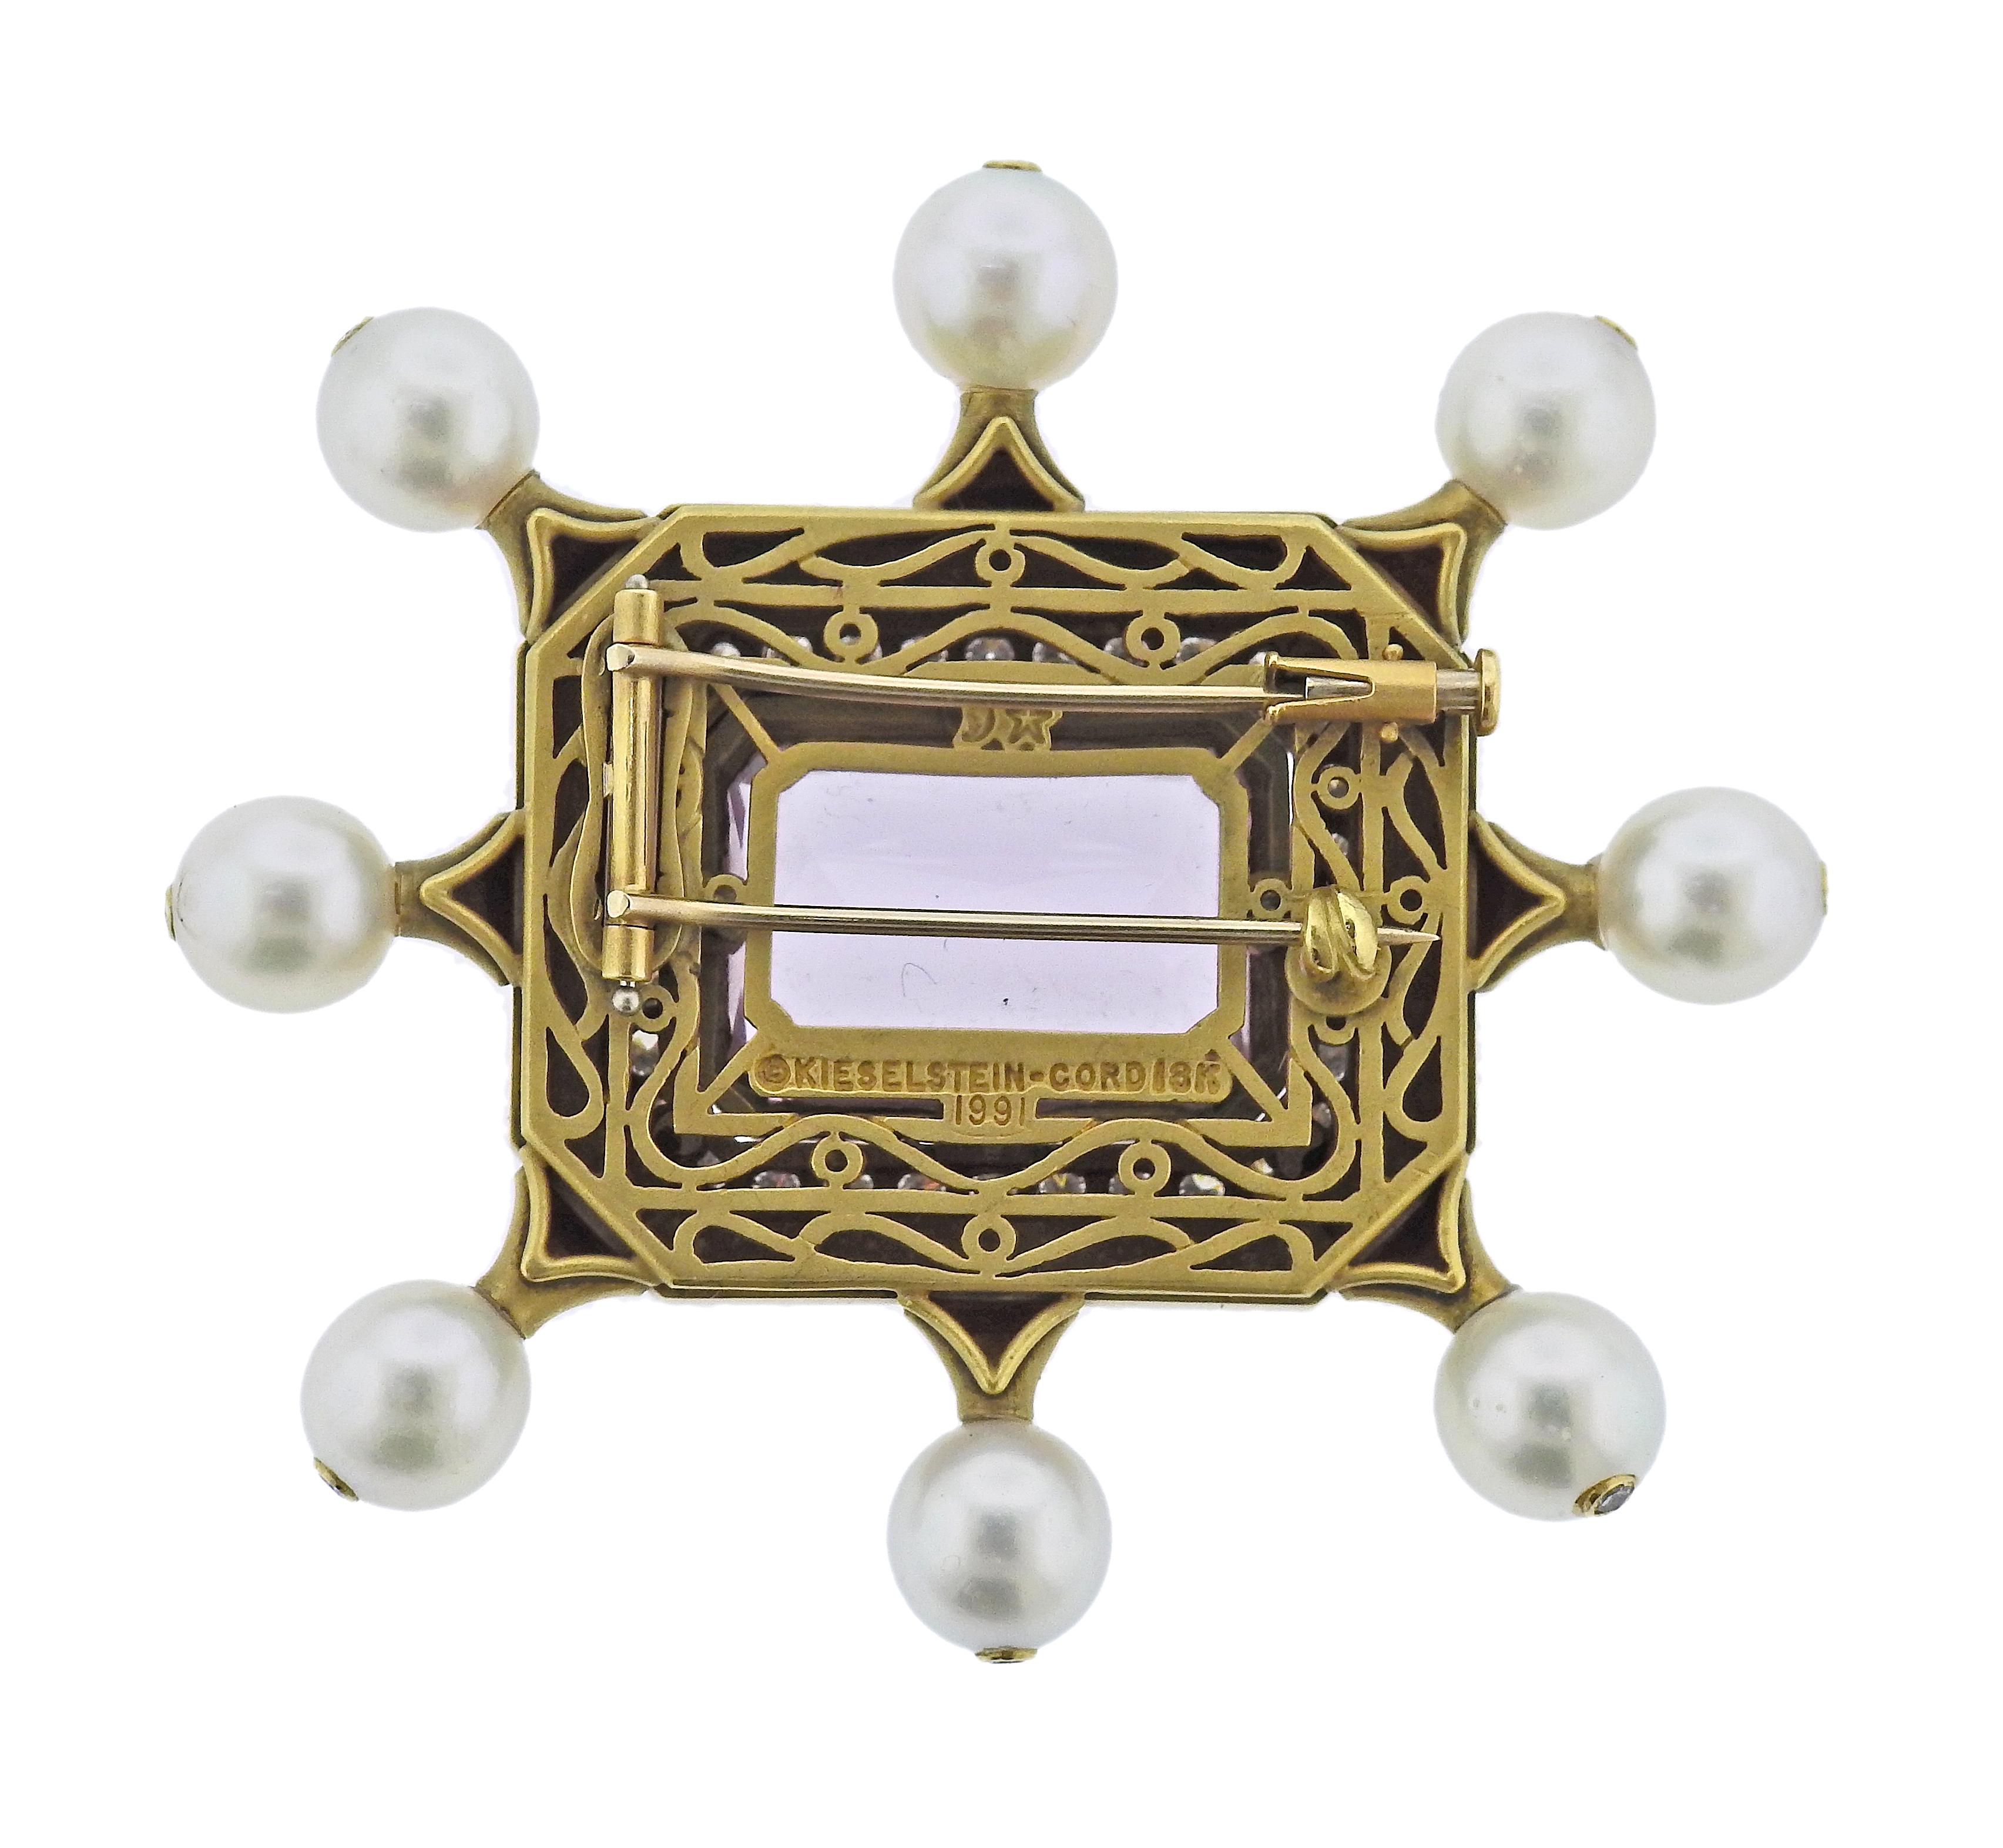 Large 18k gold brooch by Kieselstein Cord, with center approx. 23ct kunzite (stone measures 20.2 x 14.6 x 9.5mm), surrounded with 8mm pearls and approx. 1.00ctw in H/VS diamonds. Brooch measures 2 3/8